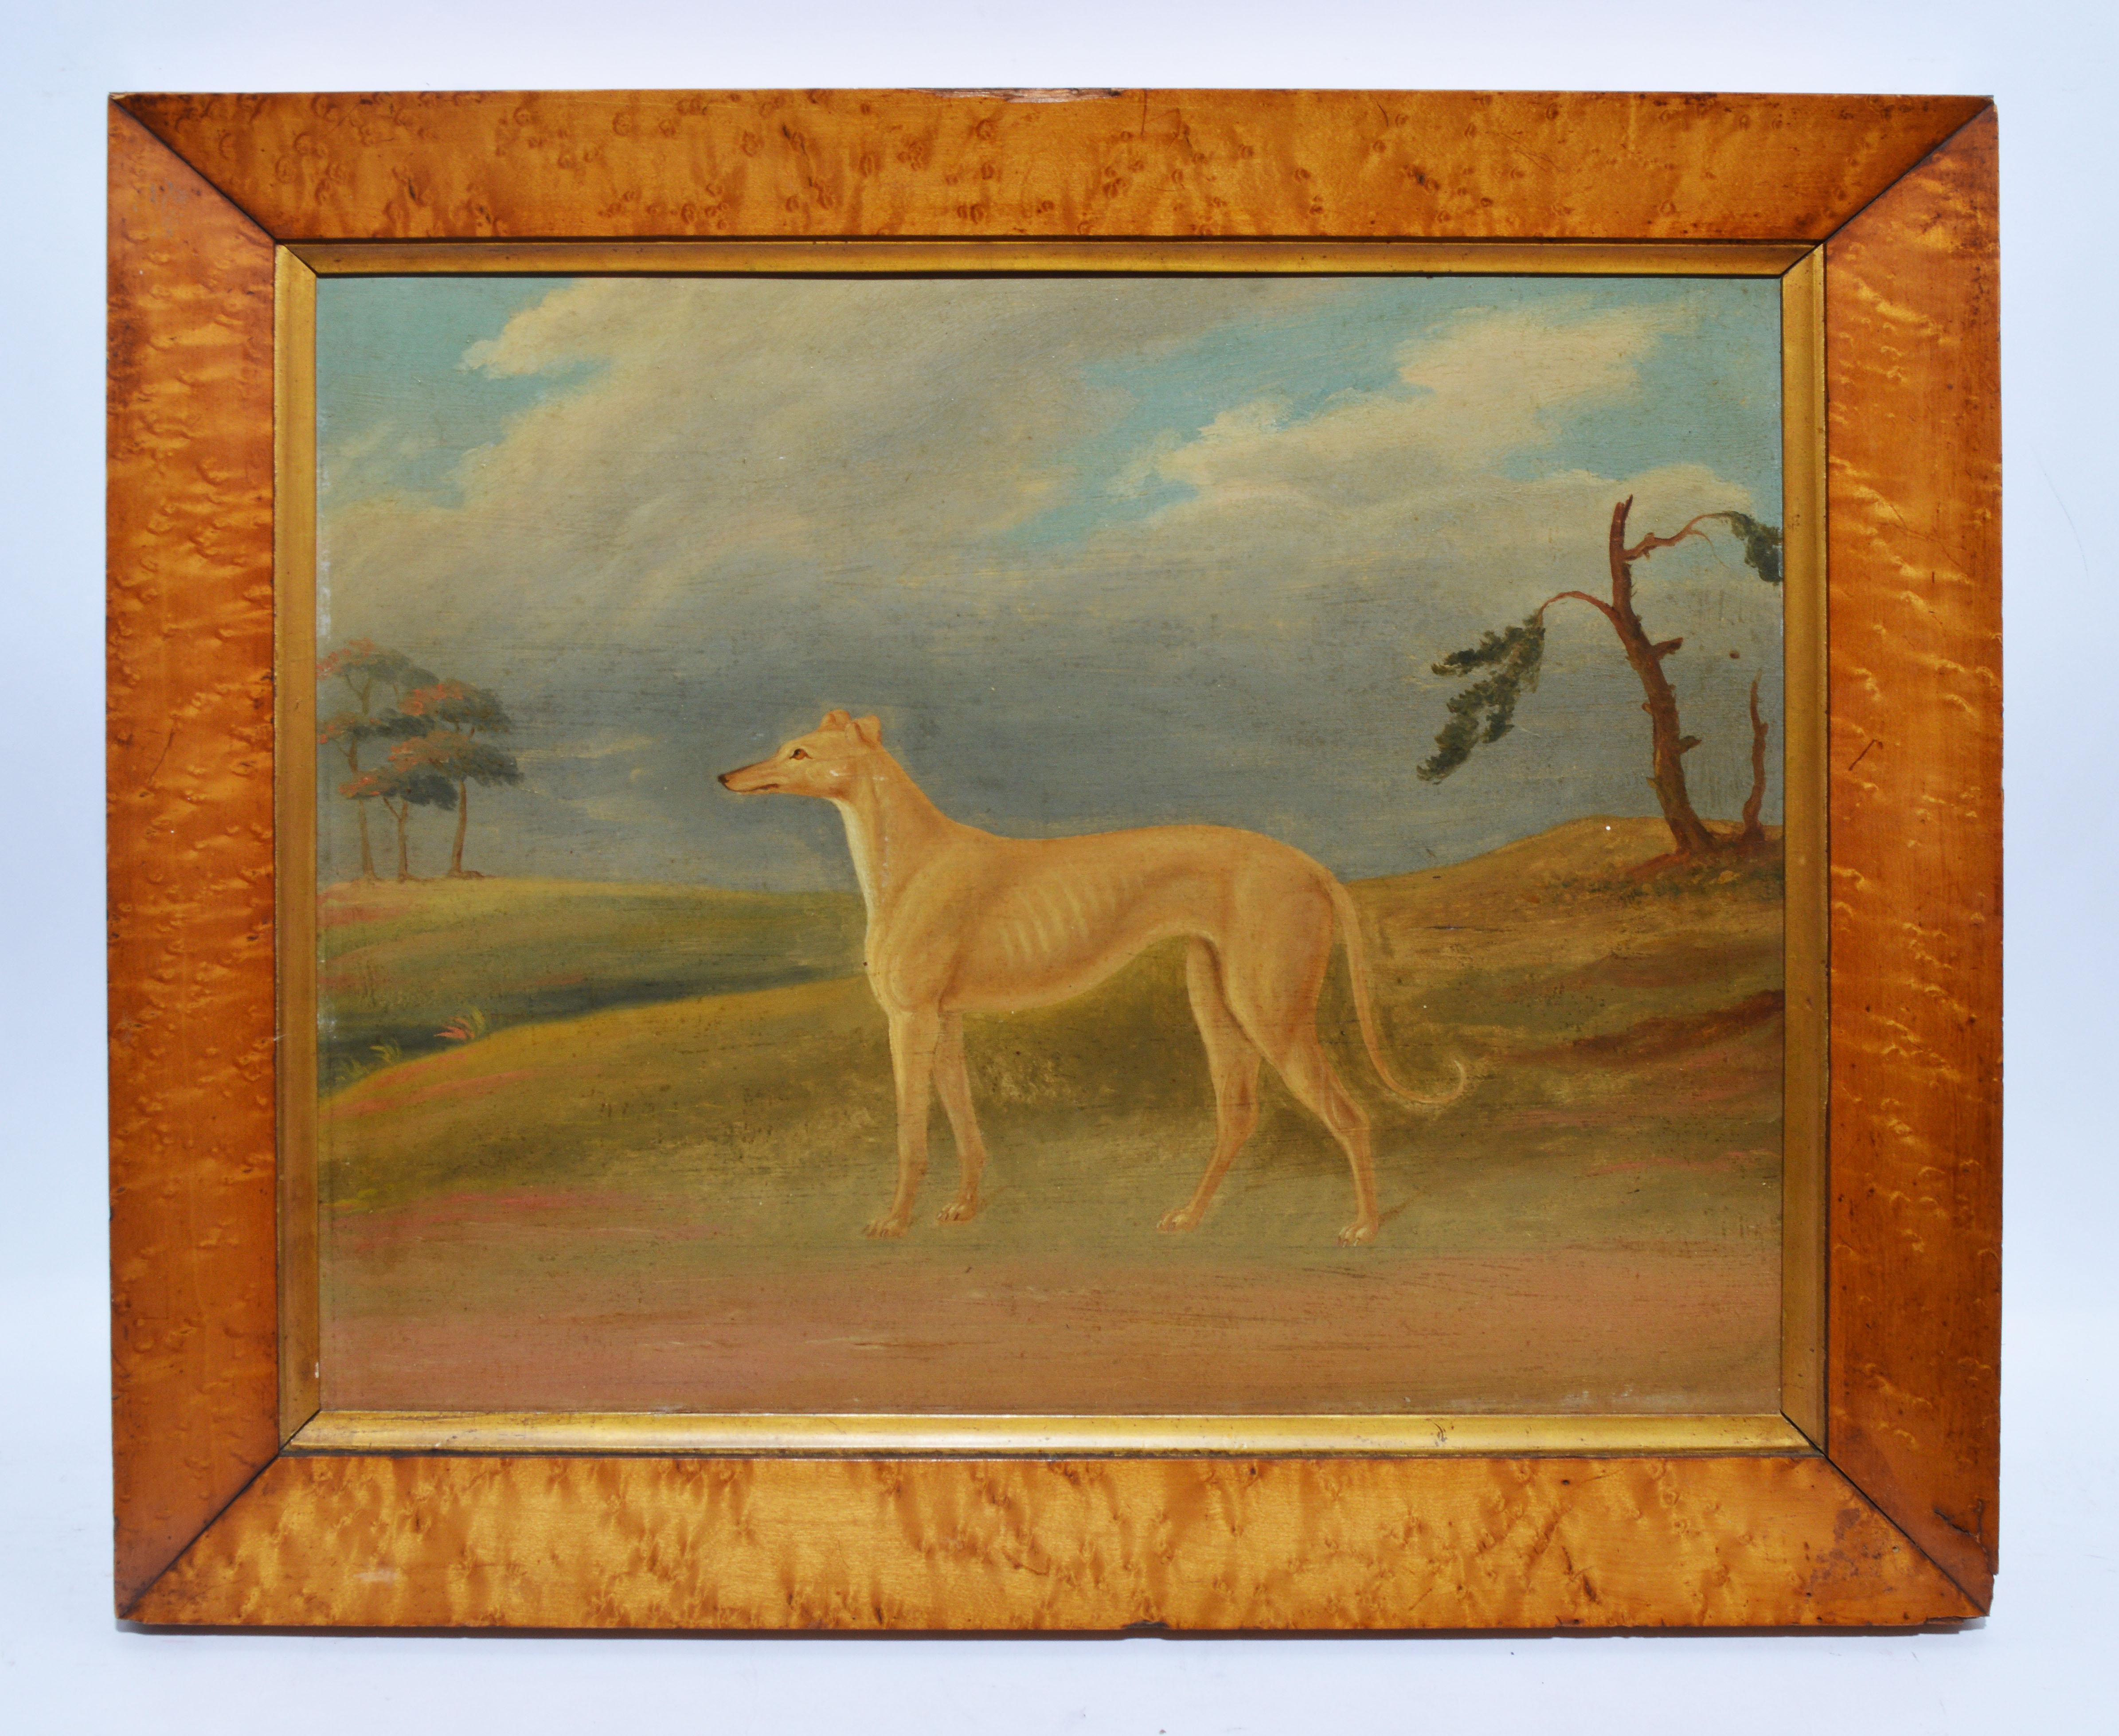 Antique American School Oil Painting of a Dog in Landscape Circa 1840 - Brown Landscape Painting by Unknown